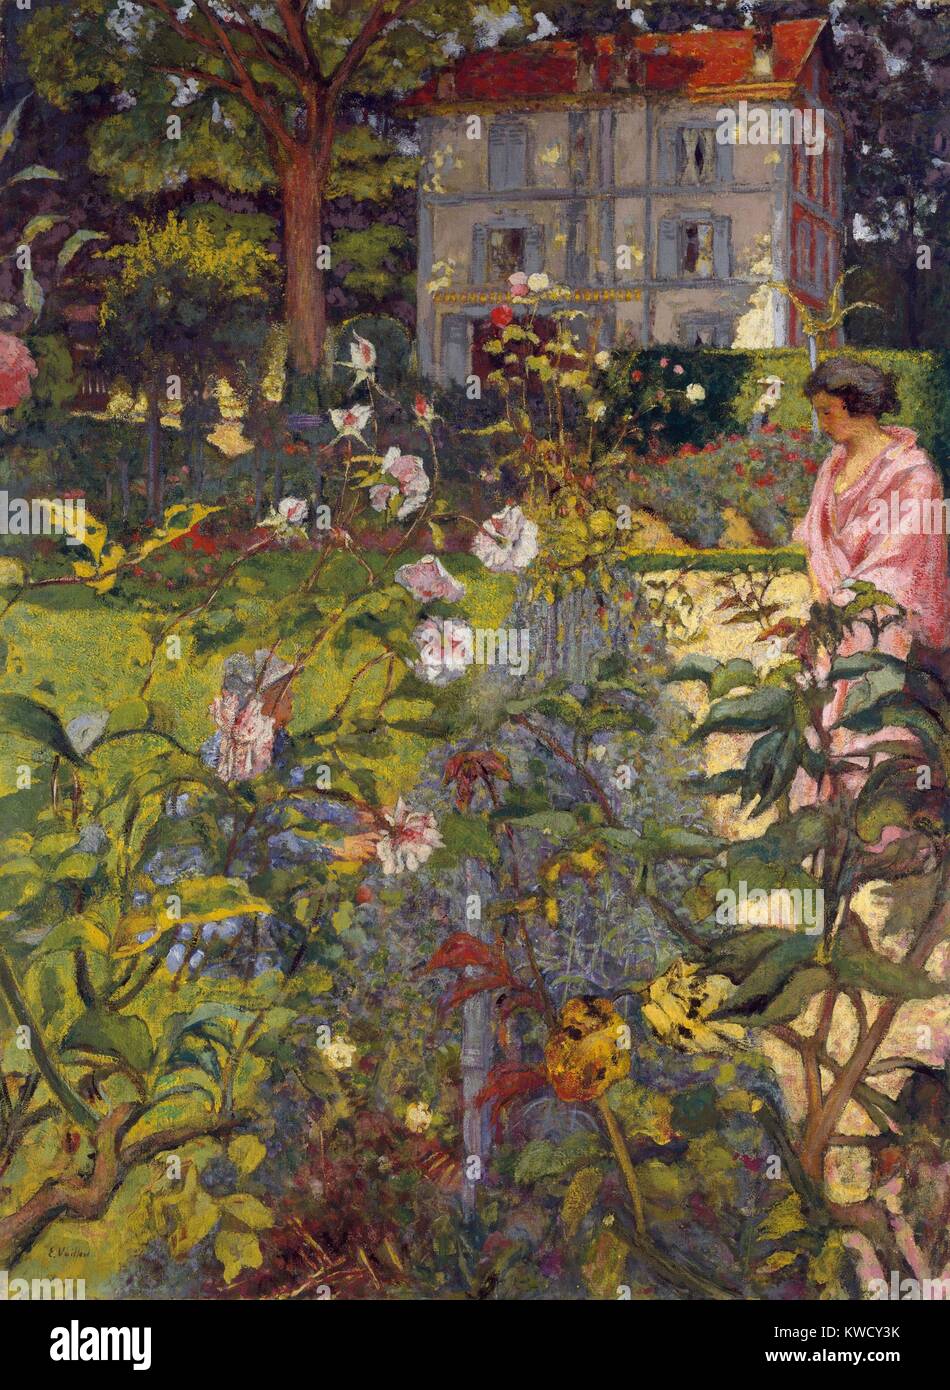 Garden at Vaucresson, by Edouard Vuillard, 1920, French Post-Impressionist painting. The two women almost lost among the plants are Lucy Hessel and her cousin. The house emerges clearly above the rich complexity of the paintings lower half (BSLOC 2017 5 103) Stock Photo